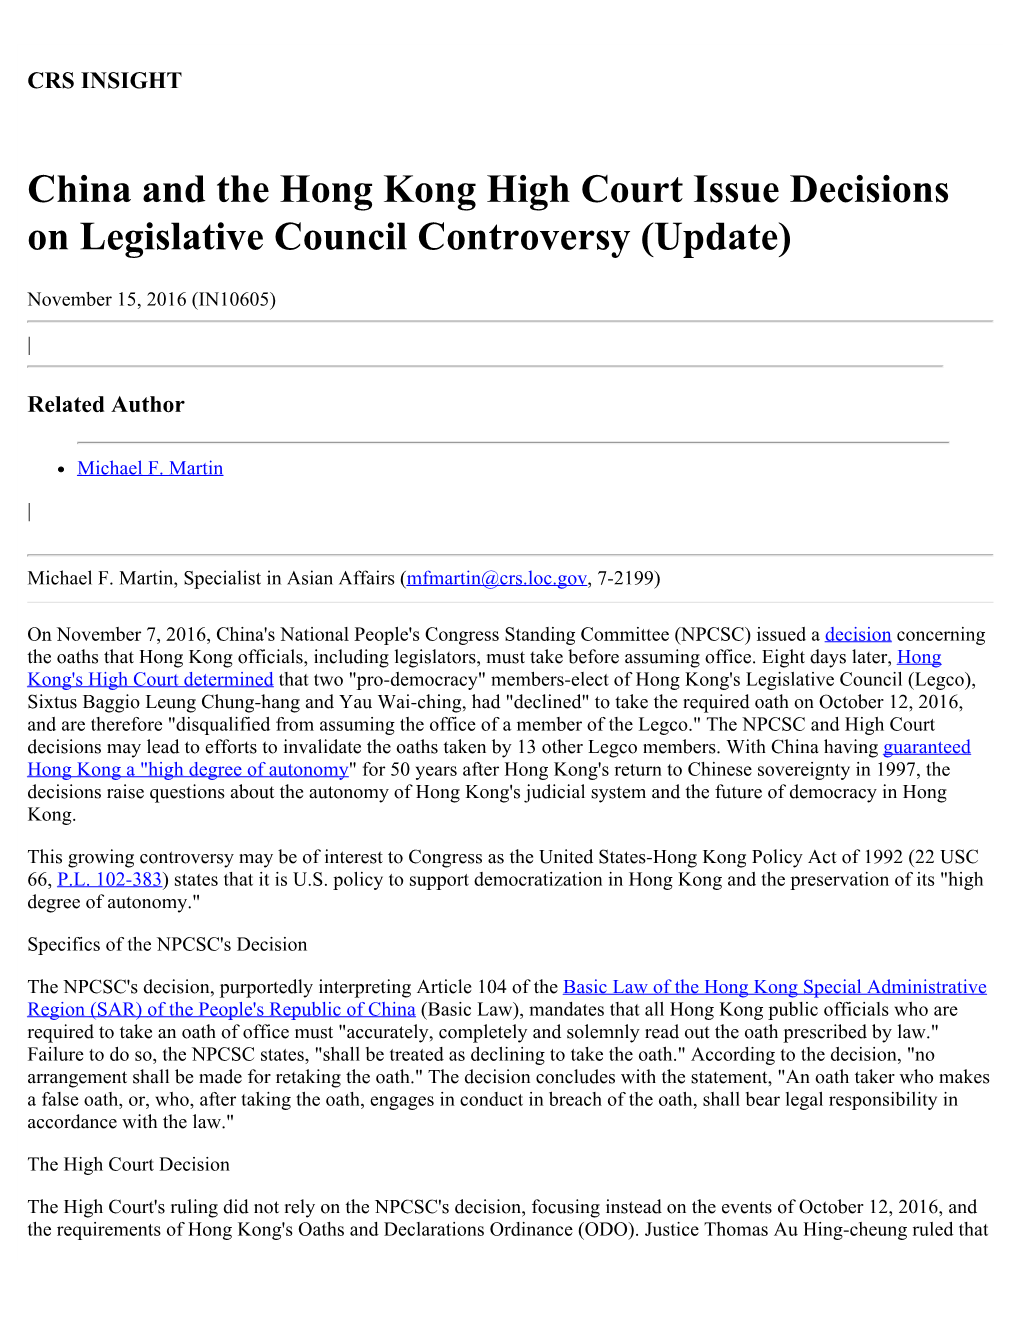 China and the Hong Kong High Court Issue Decisions on Legislative Council Controversy (Update)